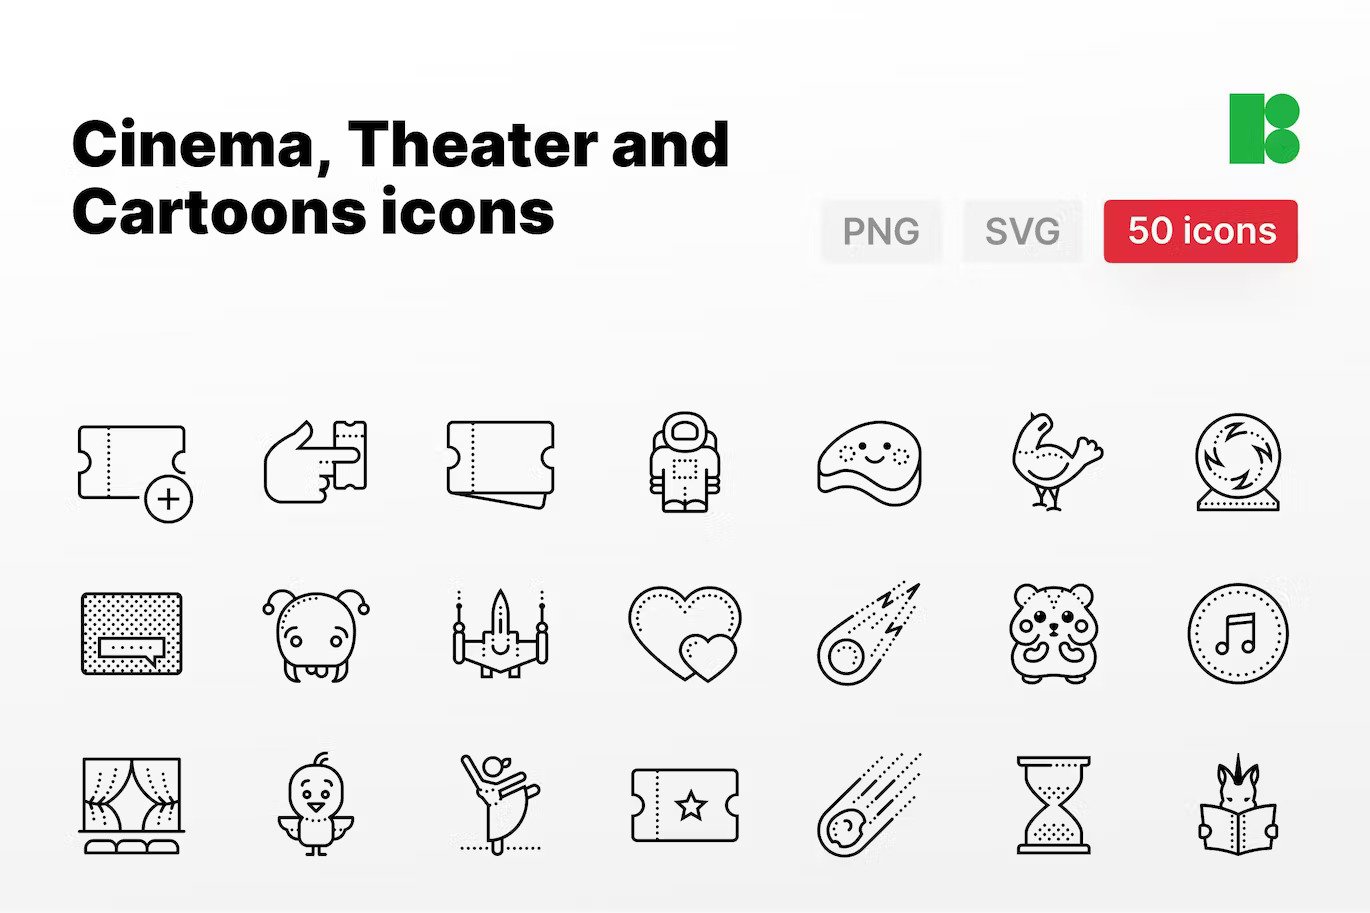 A cinema theater and cartoon icons